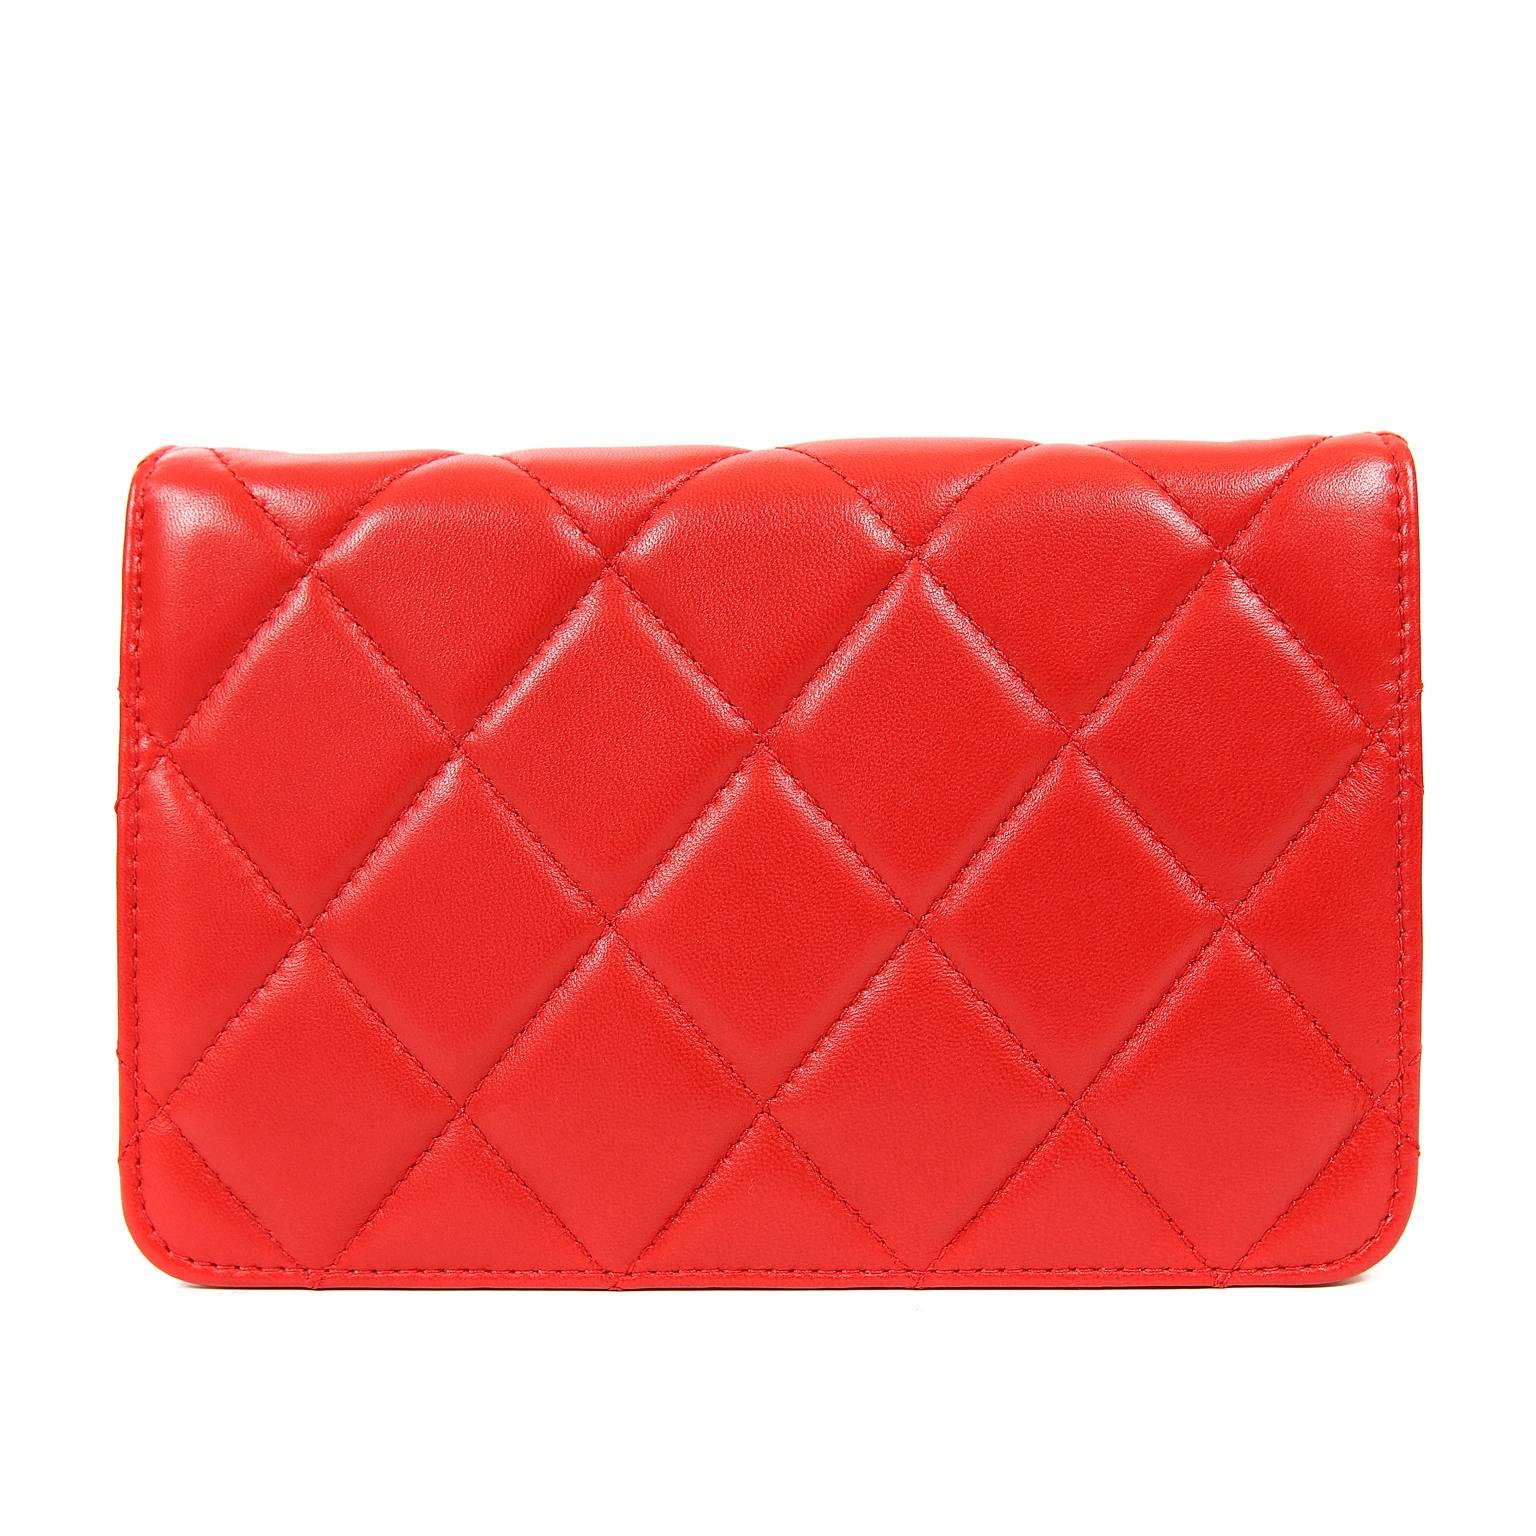 Chanel Red Lambskin WOC- PRISTINE; Never Carried
   Vivid and cheerful, this Wallet on a Chain has a unique hinged gold tone CC closure that really demands attention.  
Lipstick red lambskin Wallet on a Chain (WOC) is quilted in signature Chanel